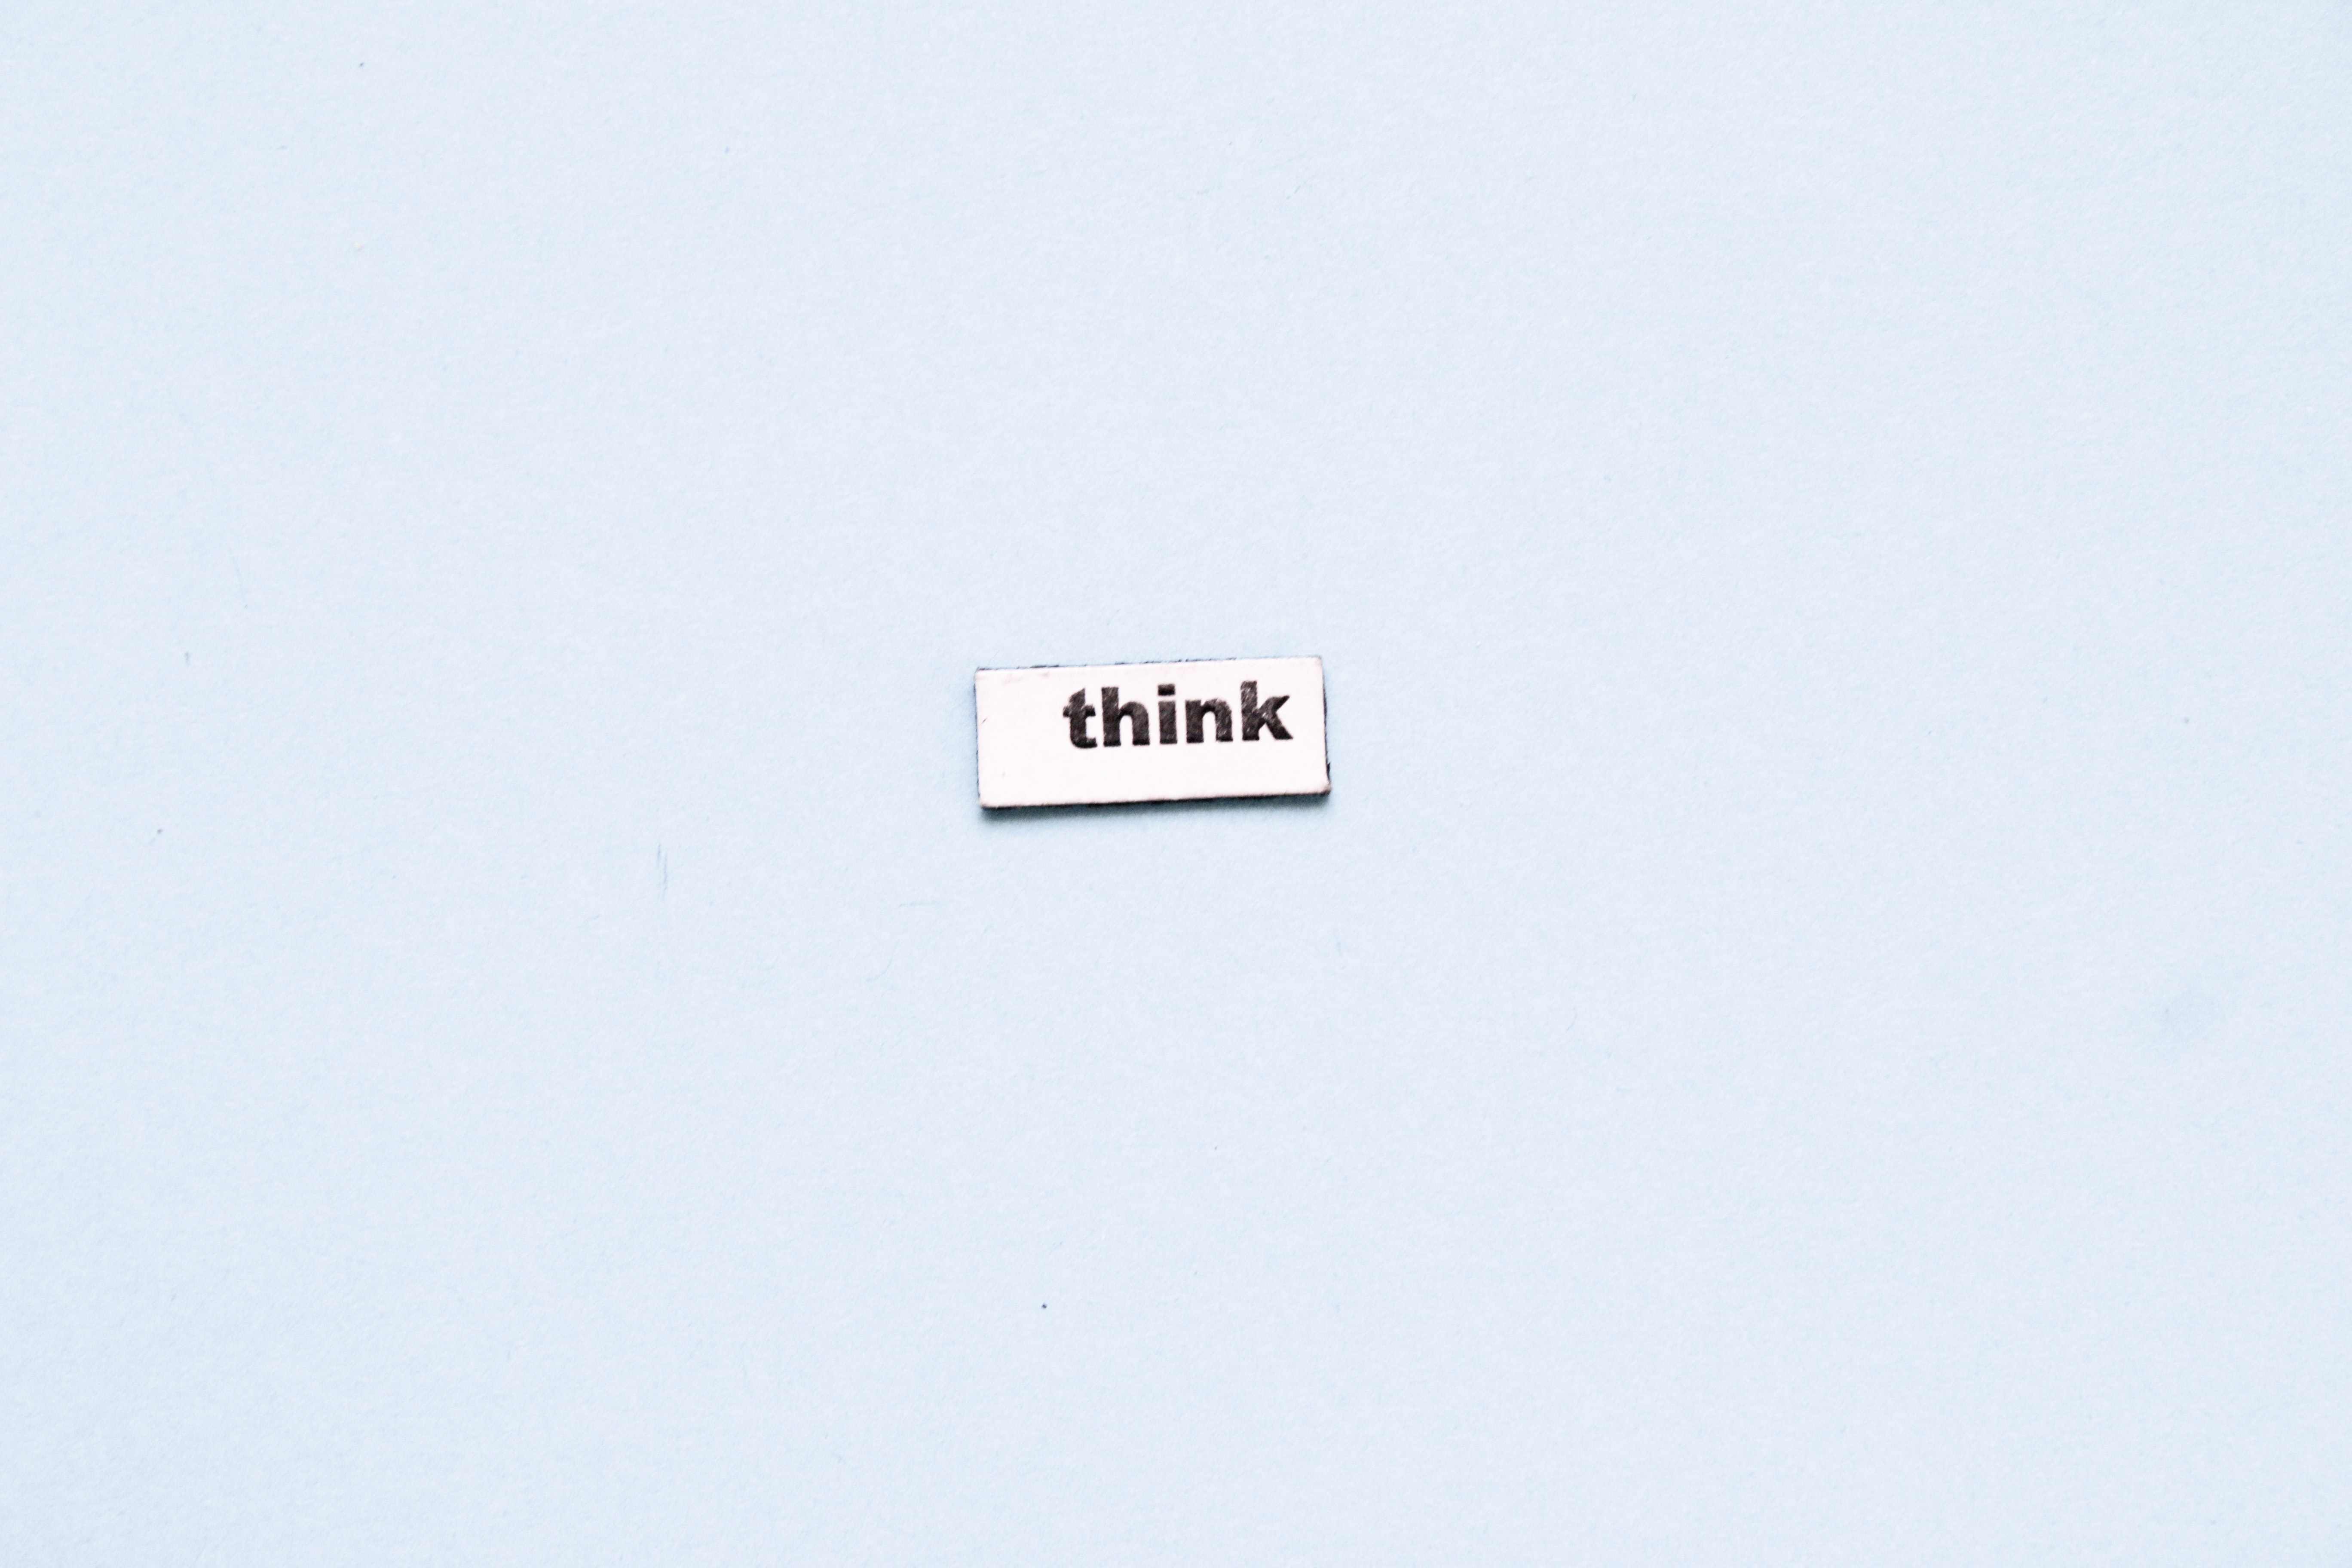 text, words, minimalism, think images